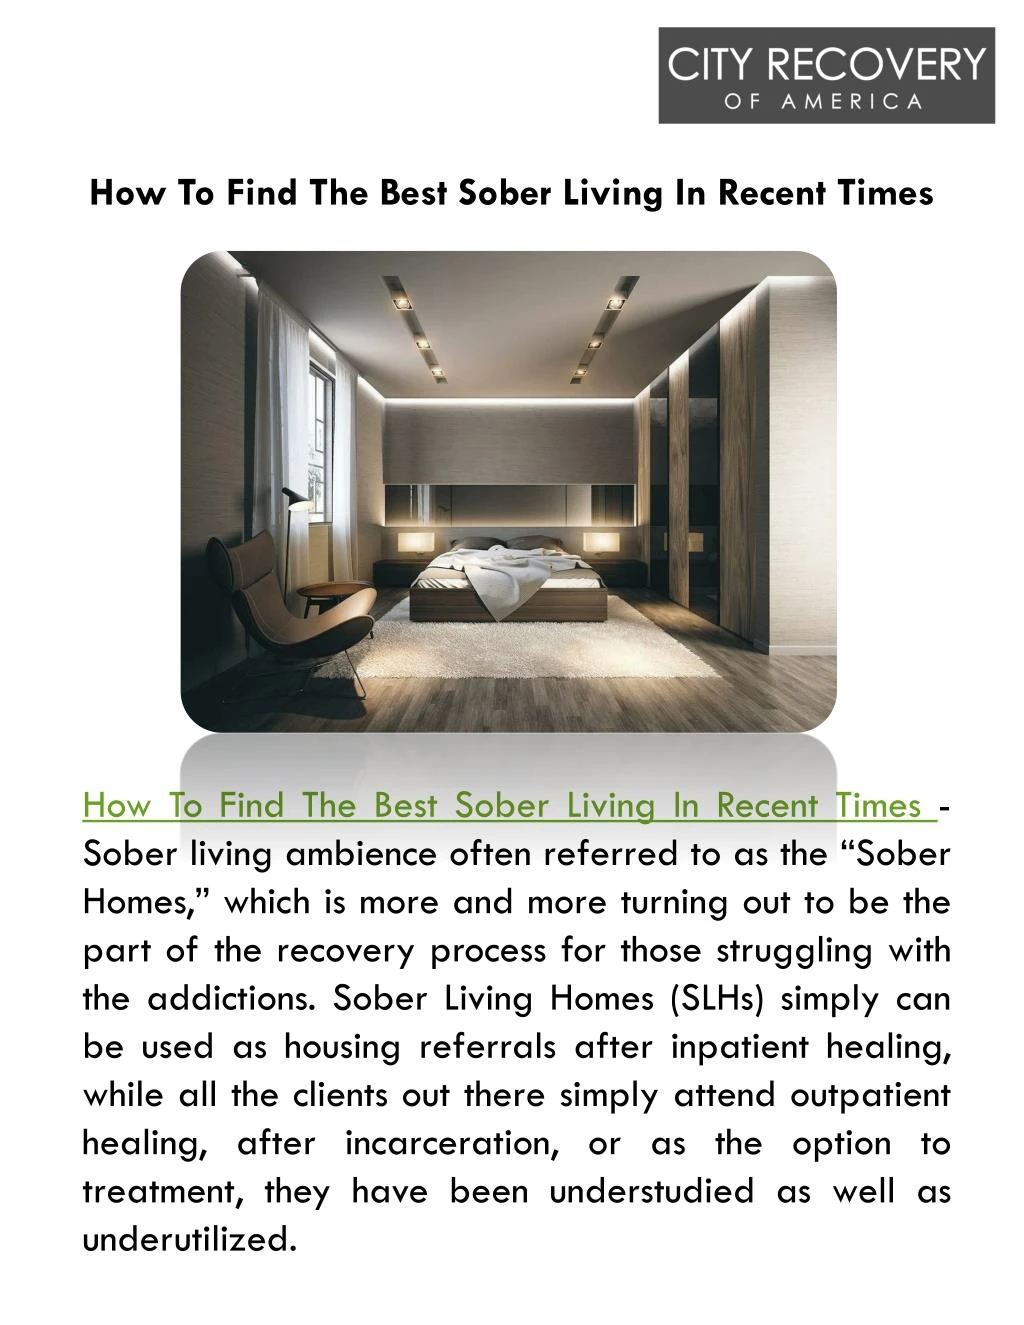 how to find the best sober living in recent times